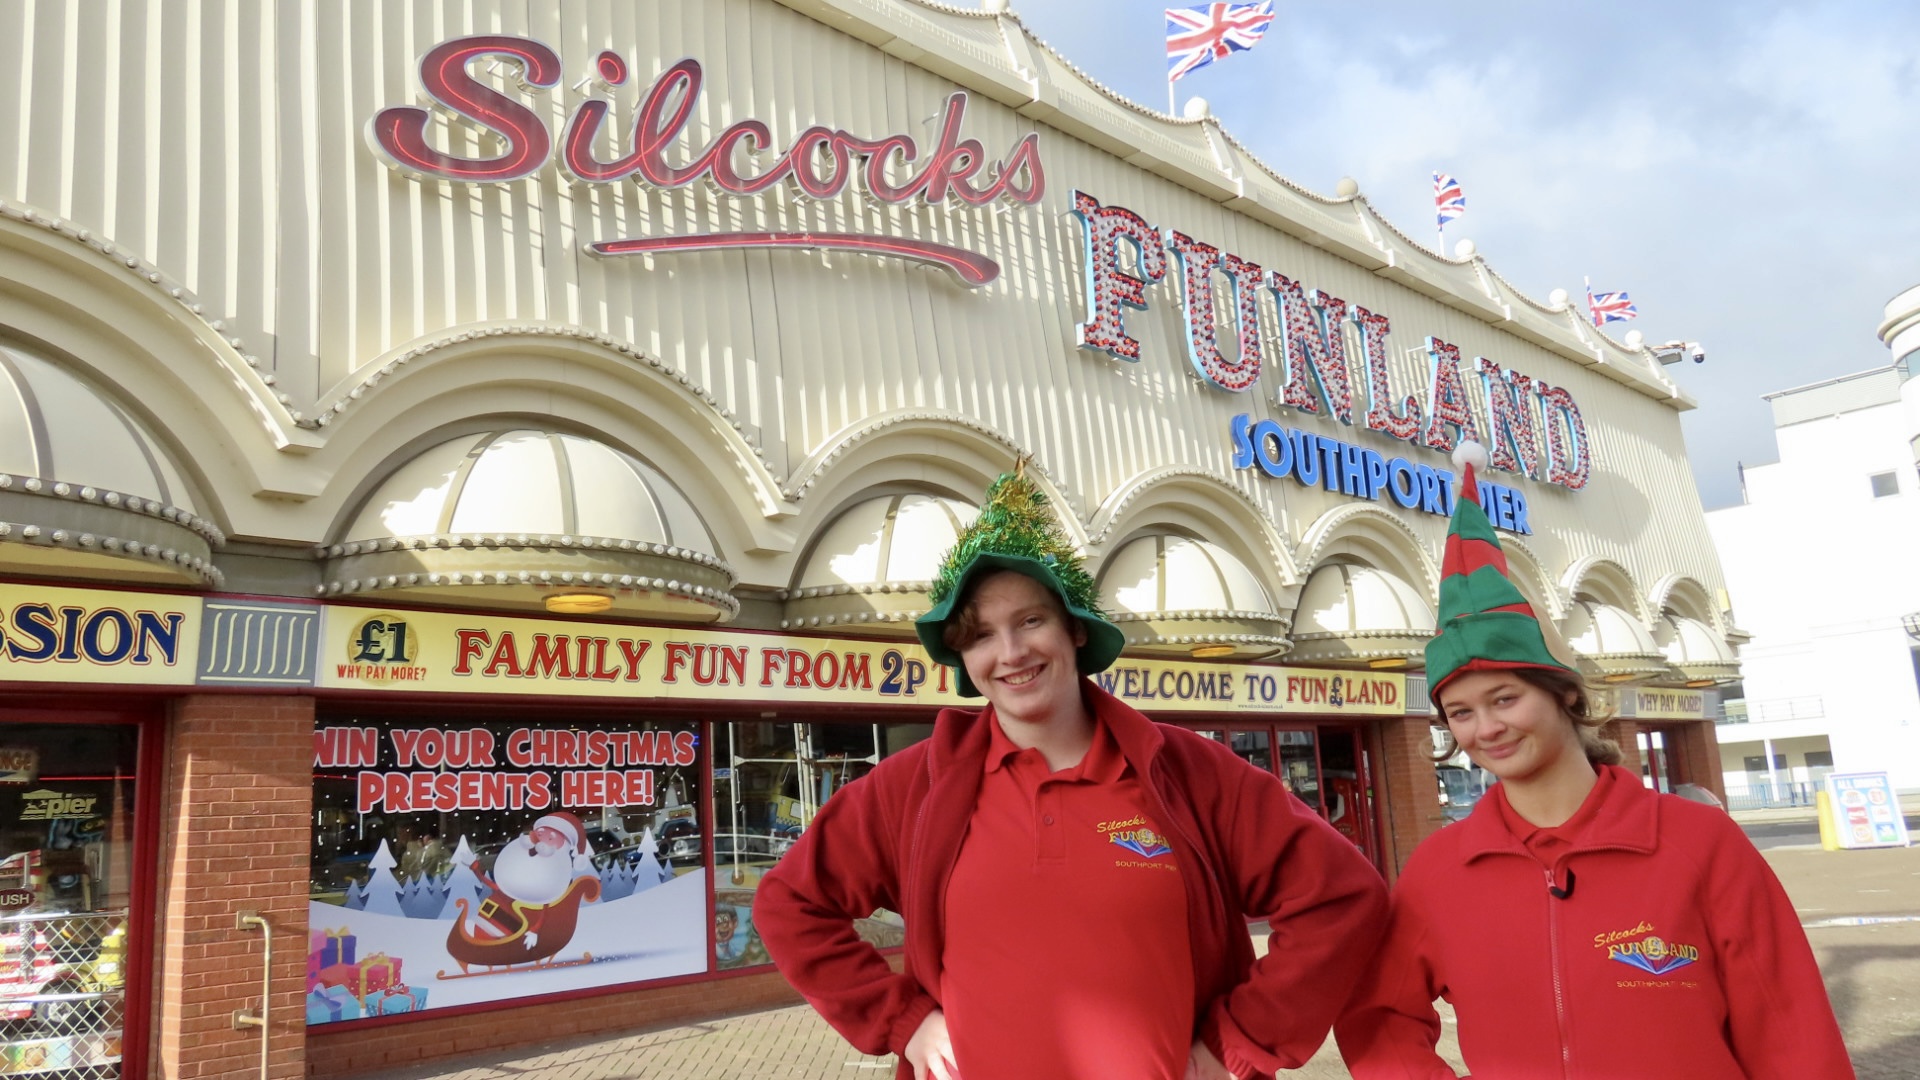 People can have fun while winning their Christmas presents at Silcocks Funland in Southport. Funland Elves Tyler and Jack. Photo by Andrew Brown Stand Up For Southport